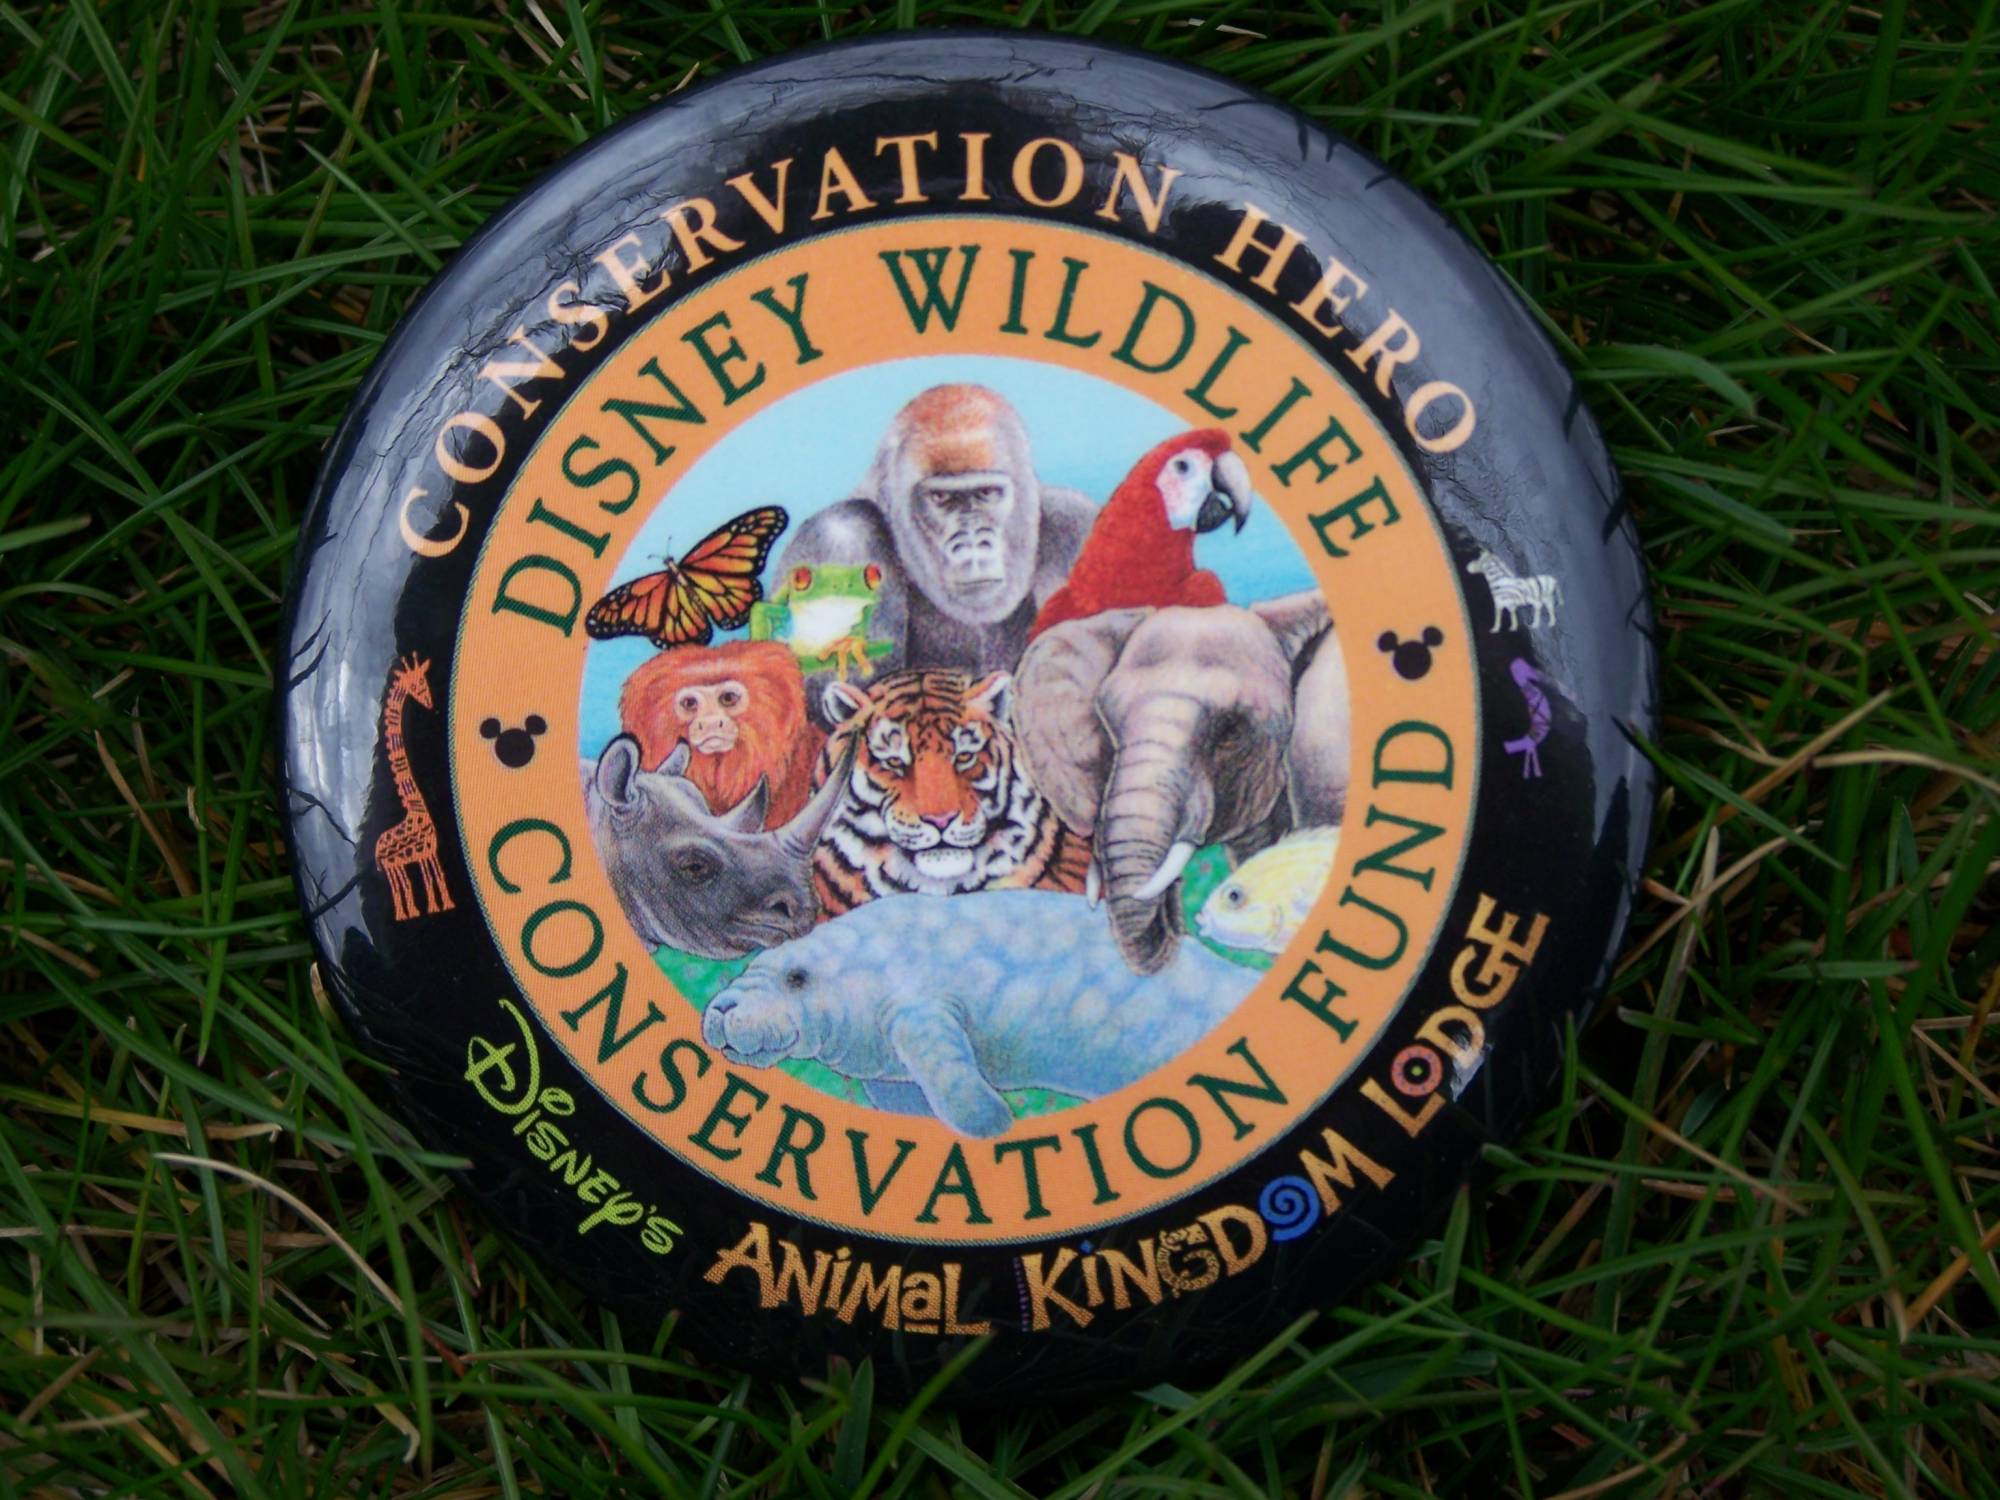 Learn what your contribution to the Disney Worldwide Conservation Fund can accomplish |PassPorter.com